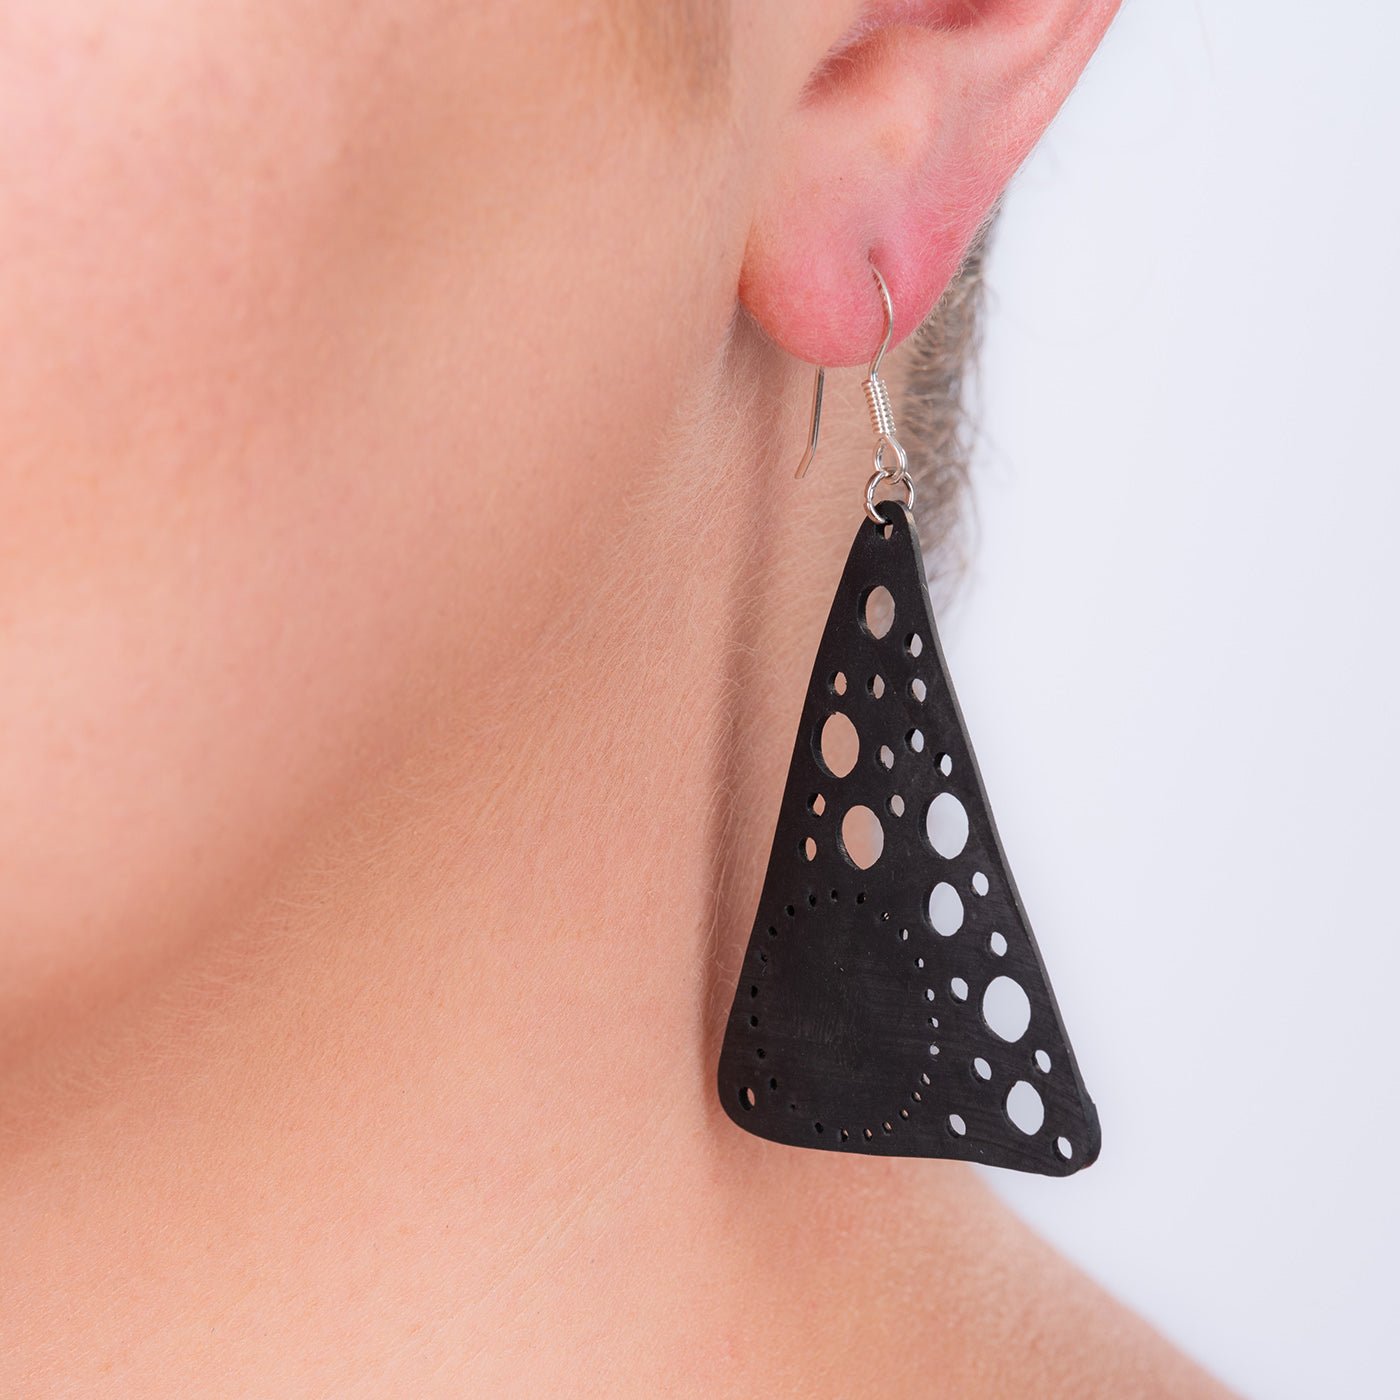 Unique Recycled Rubber Triangle Earrings by Paguro Upcycle